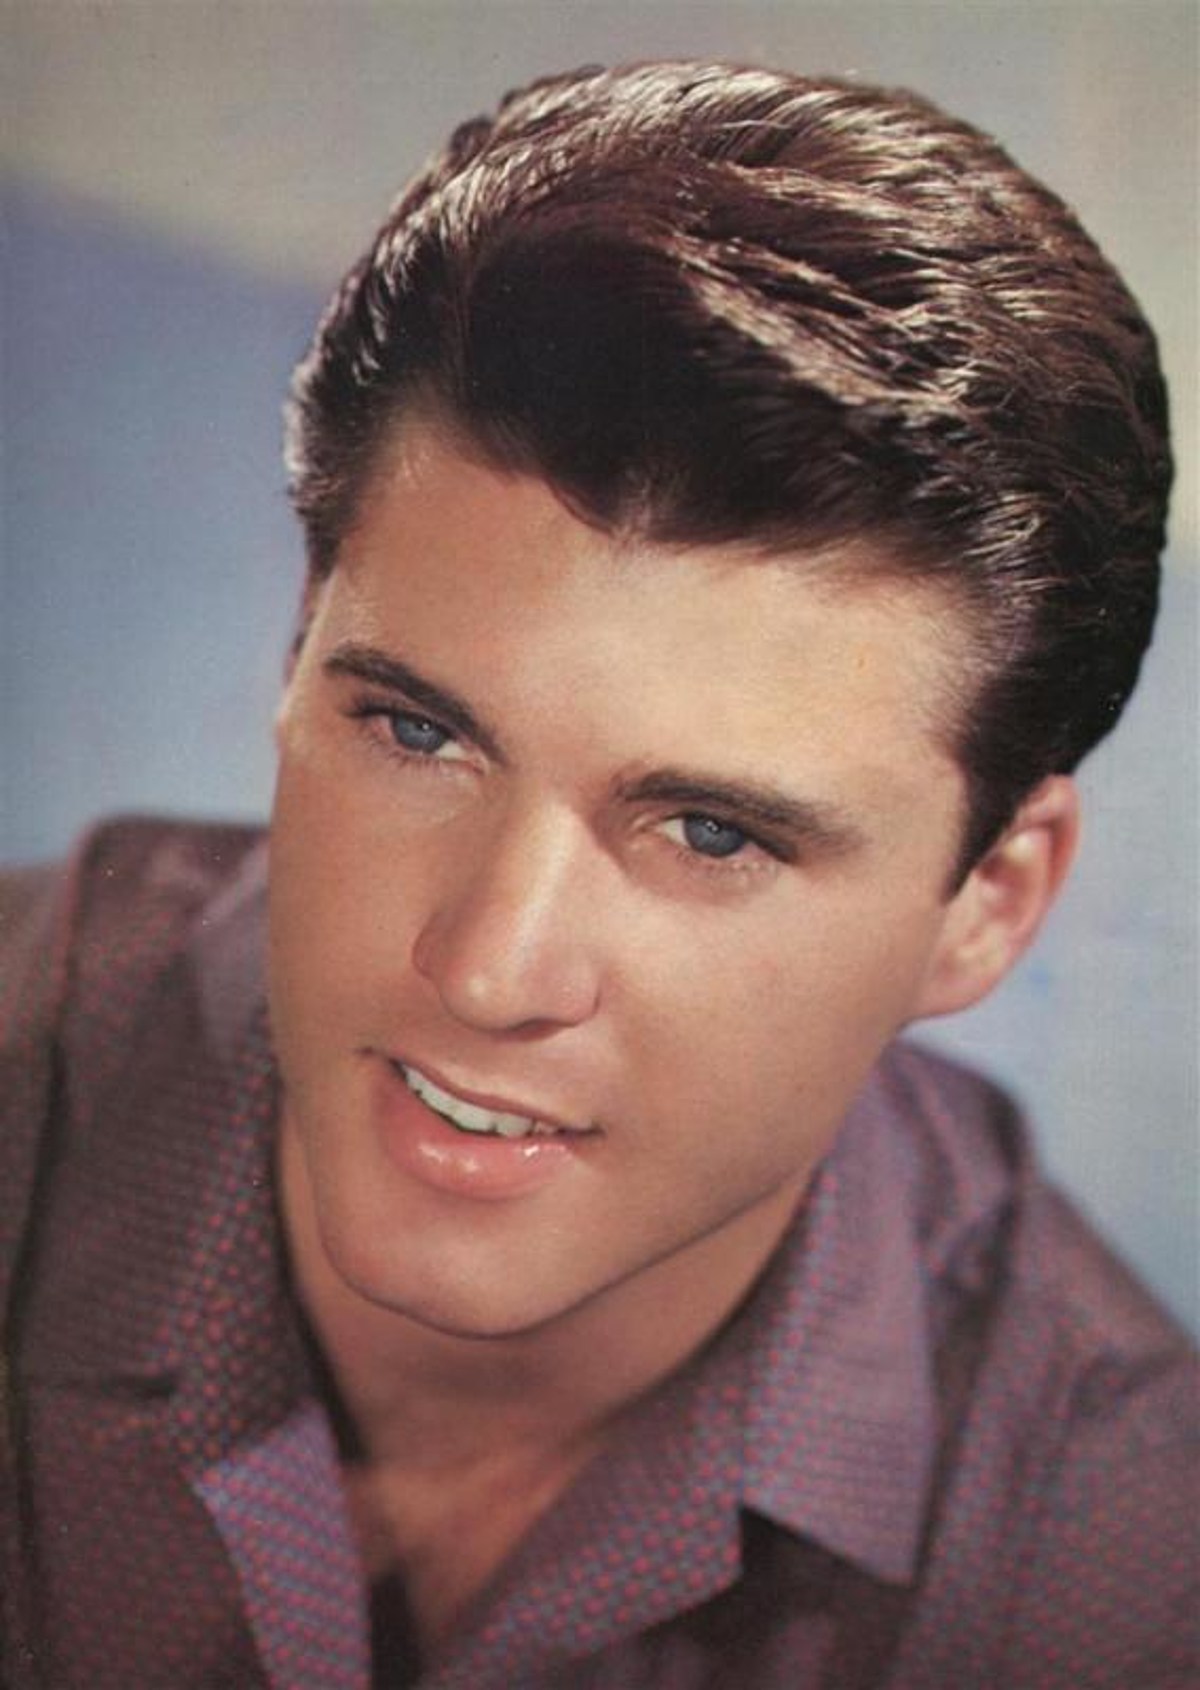 Because of the popularity of The Ozzie and Harriet Show, Ricky Nelson was a...